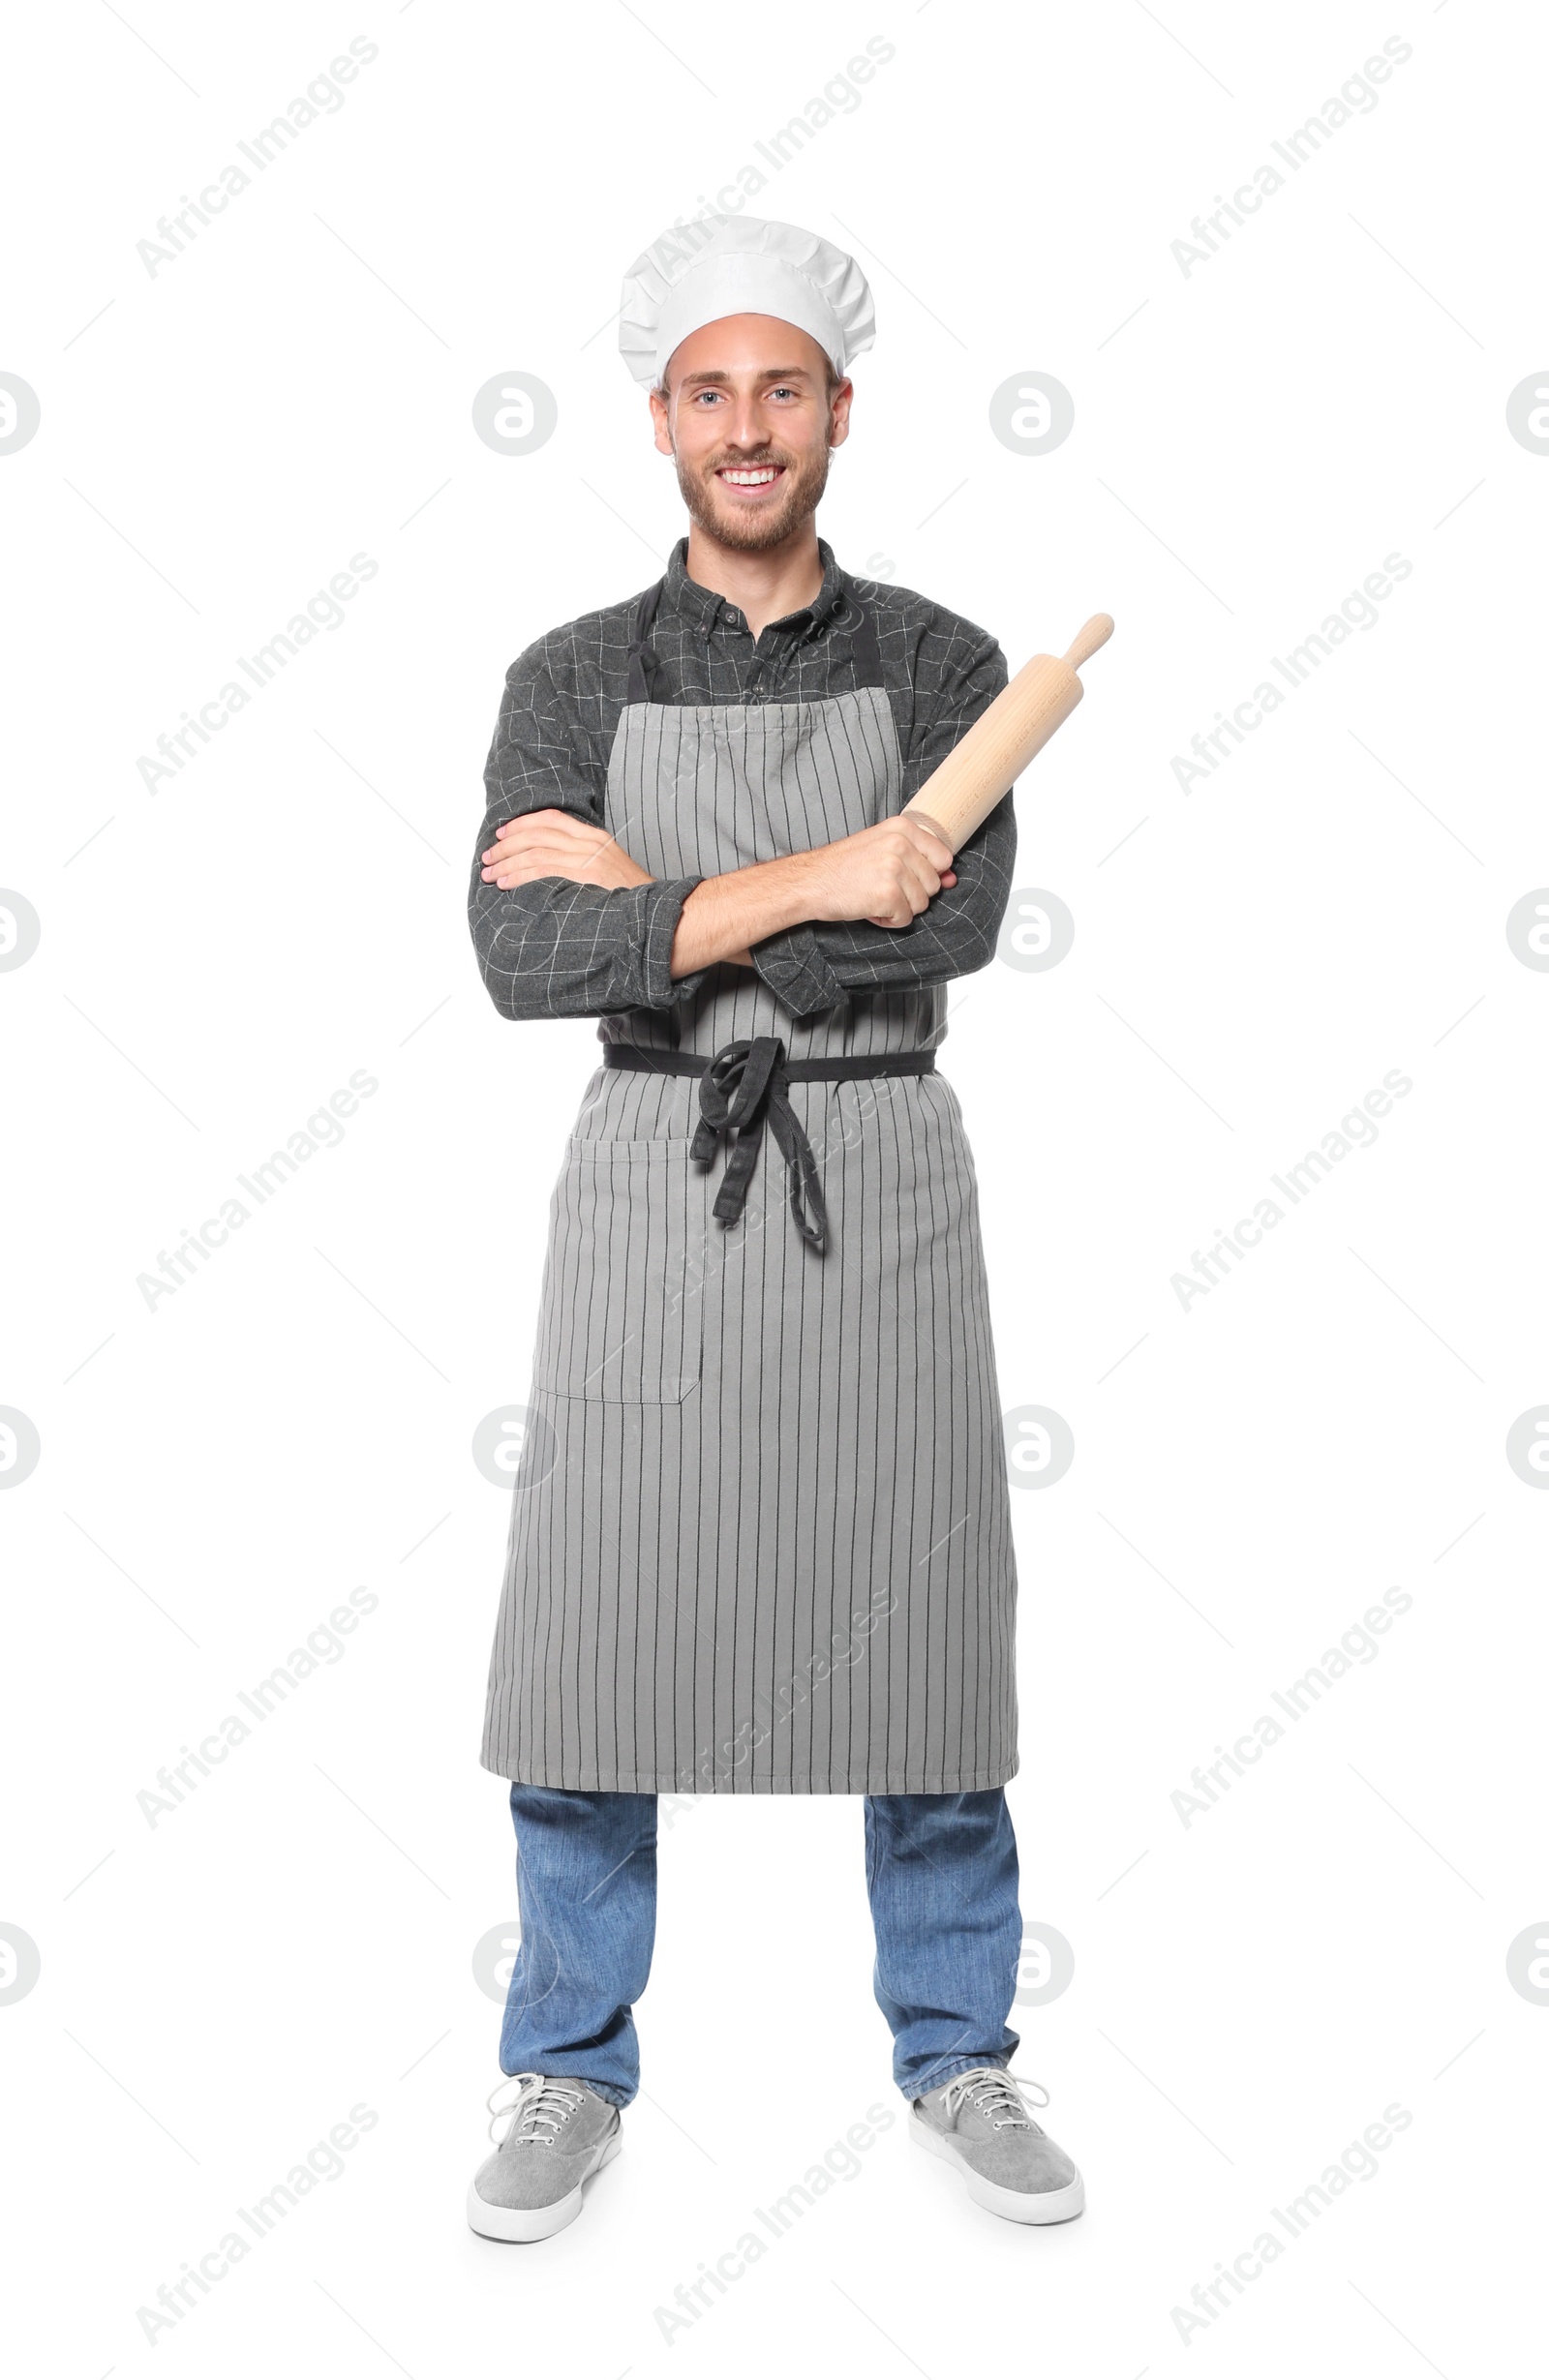 Photo of Professional chef holding rolling pin on white background